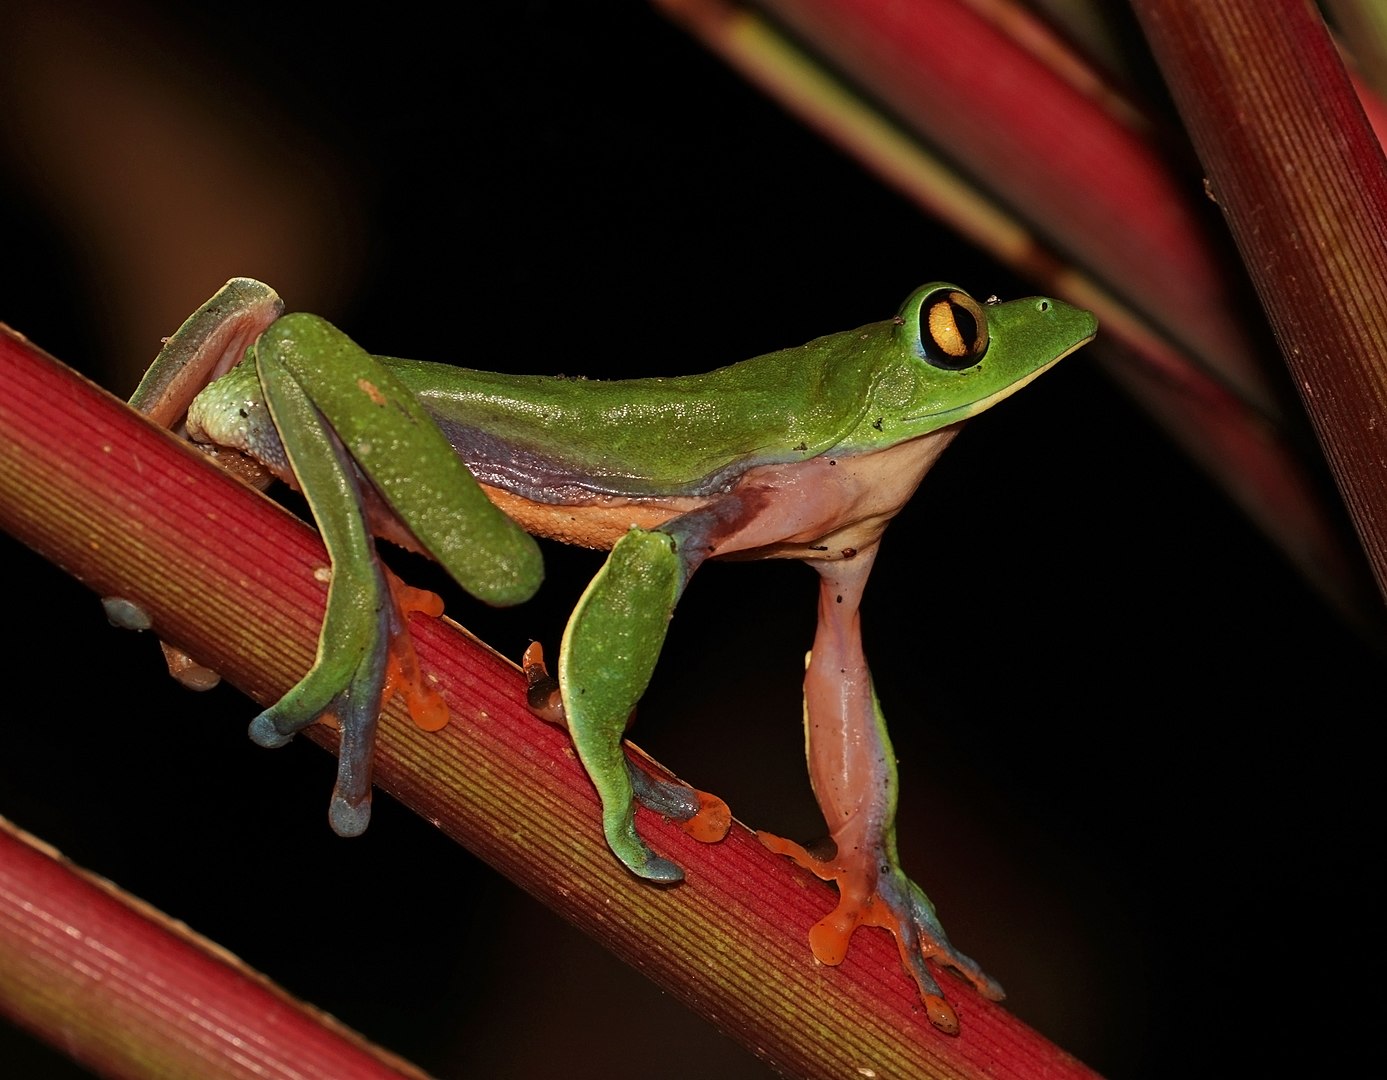 A side profile portrait of a golden-eyed tree frog sitting on a small tree branch.